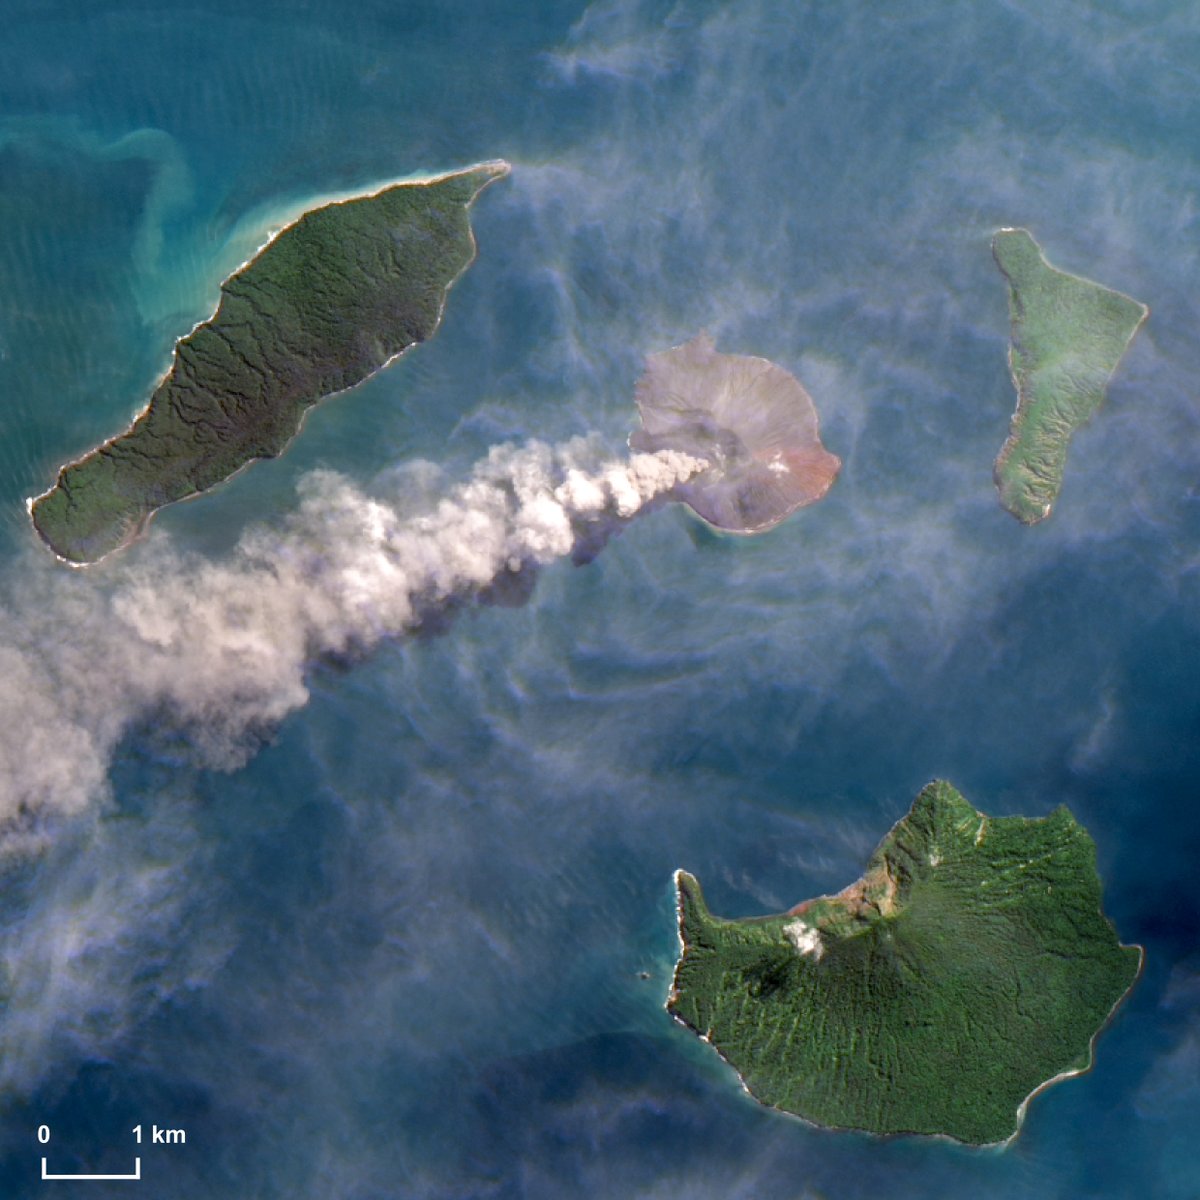 ⚠️🔴🌋🇮🇩 Fountains of lava and long plumes of ash and gases: the #Anak #Krakatau has woken up again in the last few days.This #Landsat 8 image shows the #volcano activity on June 9, while today a new ash plume reached more than 3km of height #Indonesia #volcaniceruption @id_magma